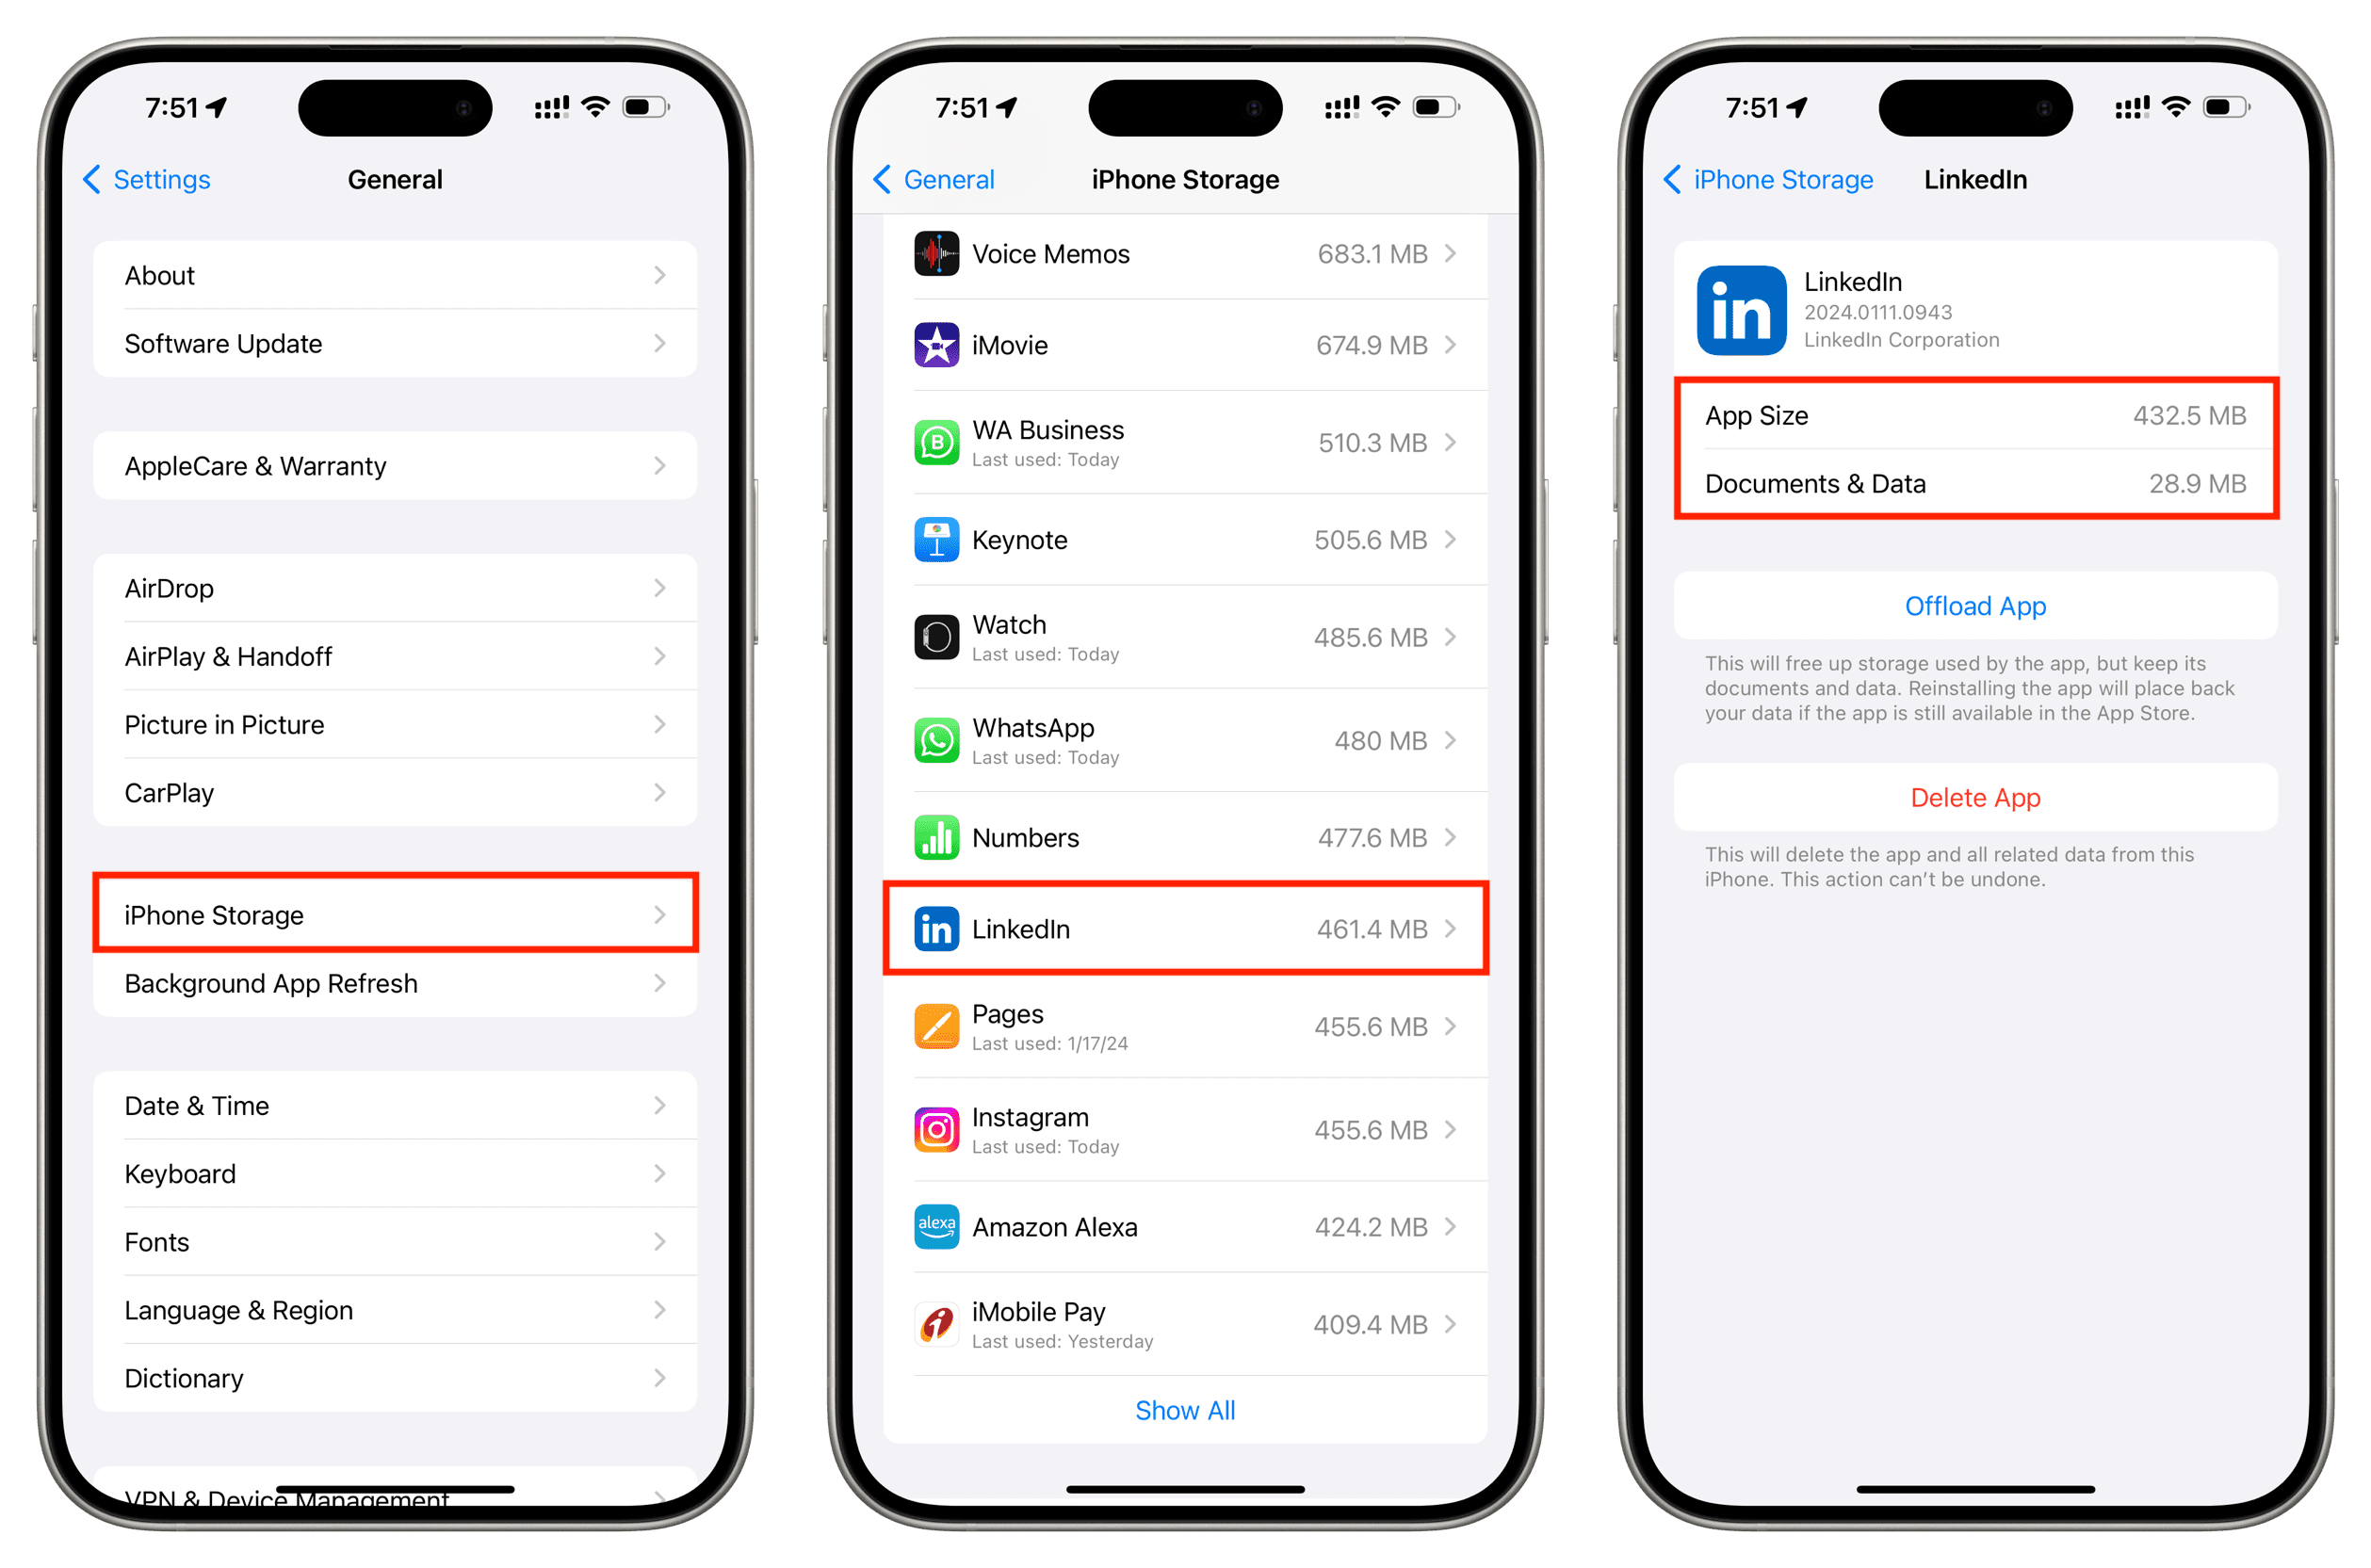 See app size and documents and data size for an iPhone app